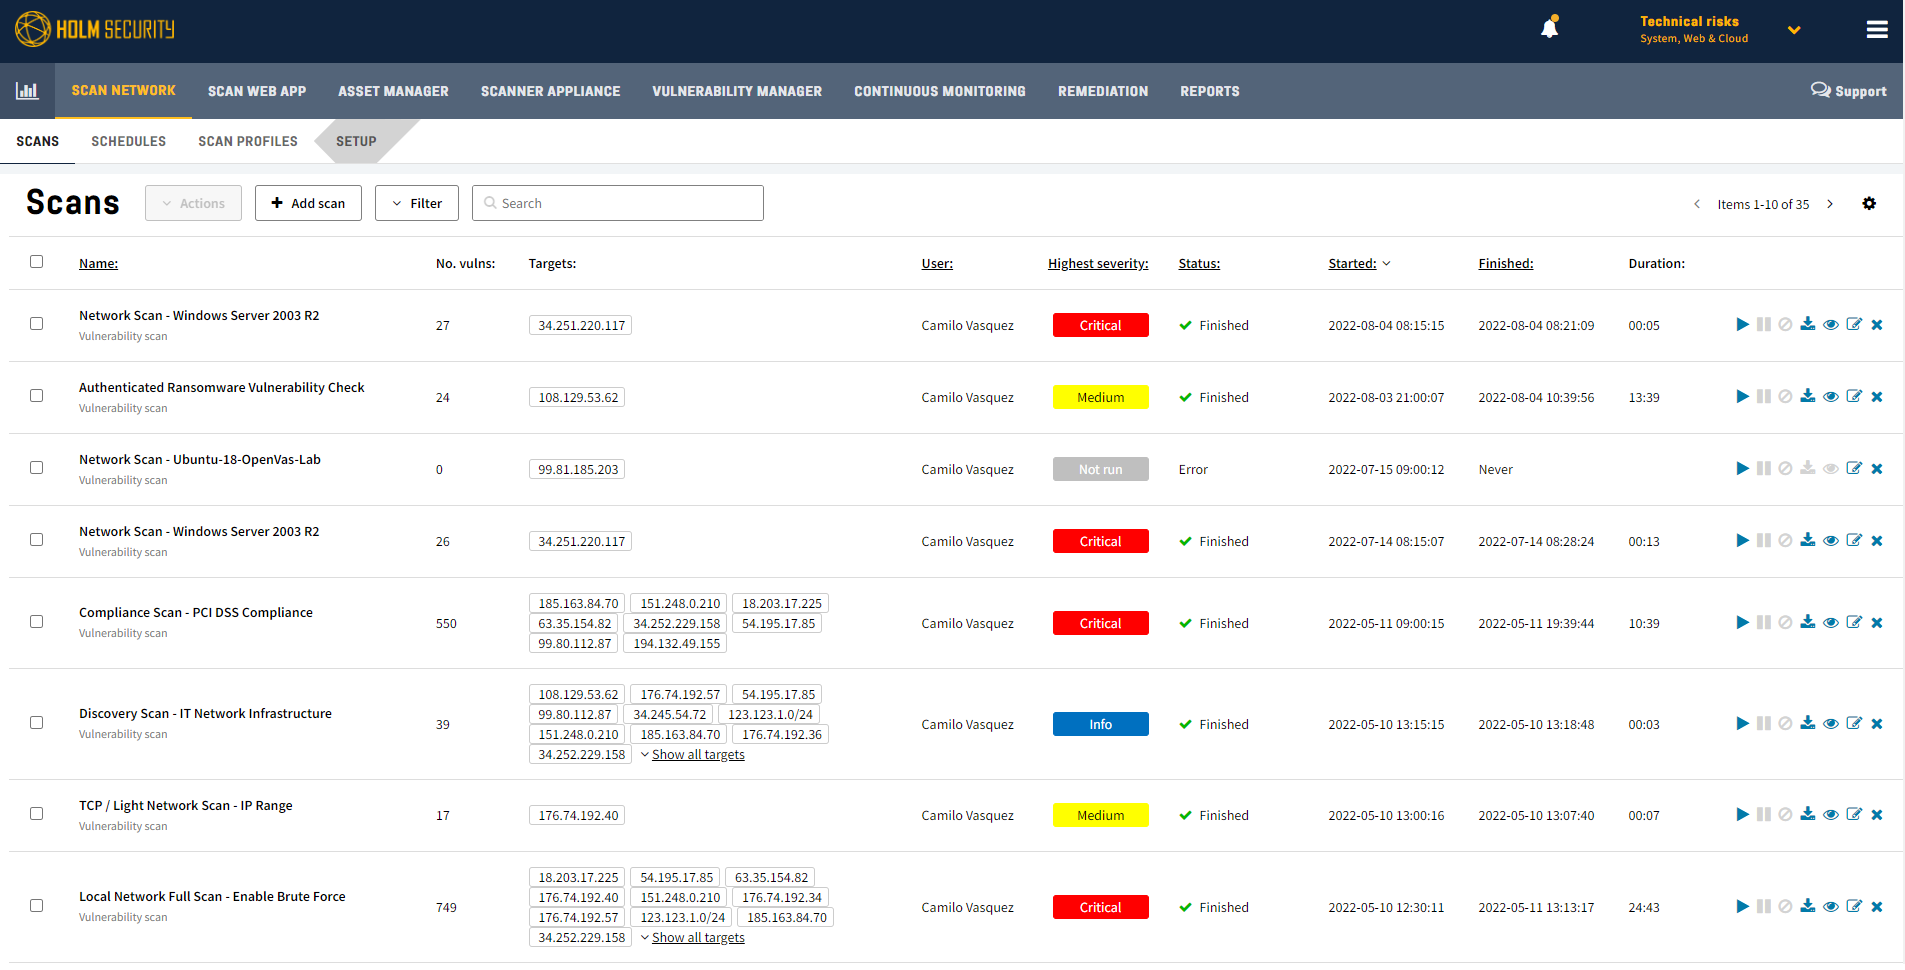 Security Center - System & Network Vulnerability Assessment Dashboard